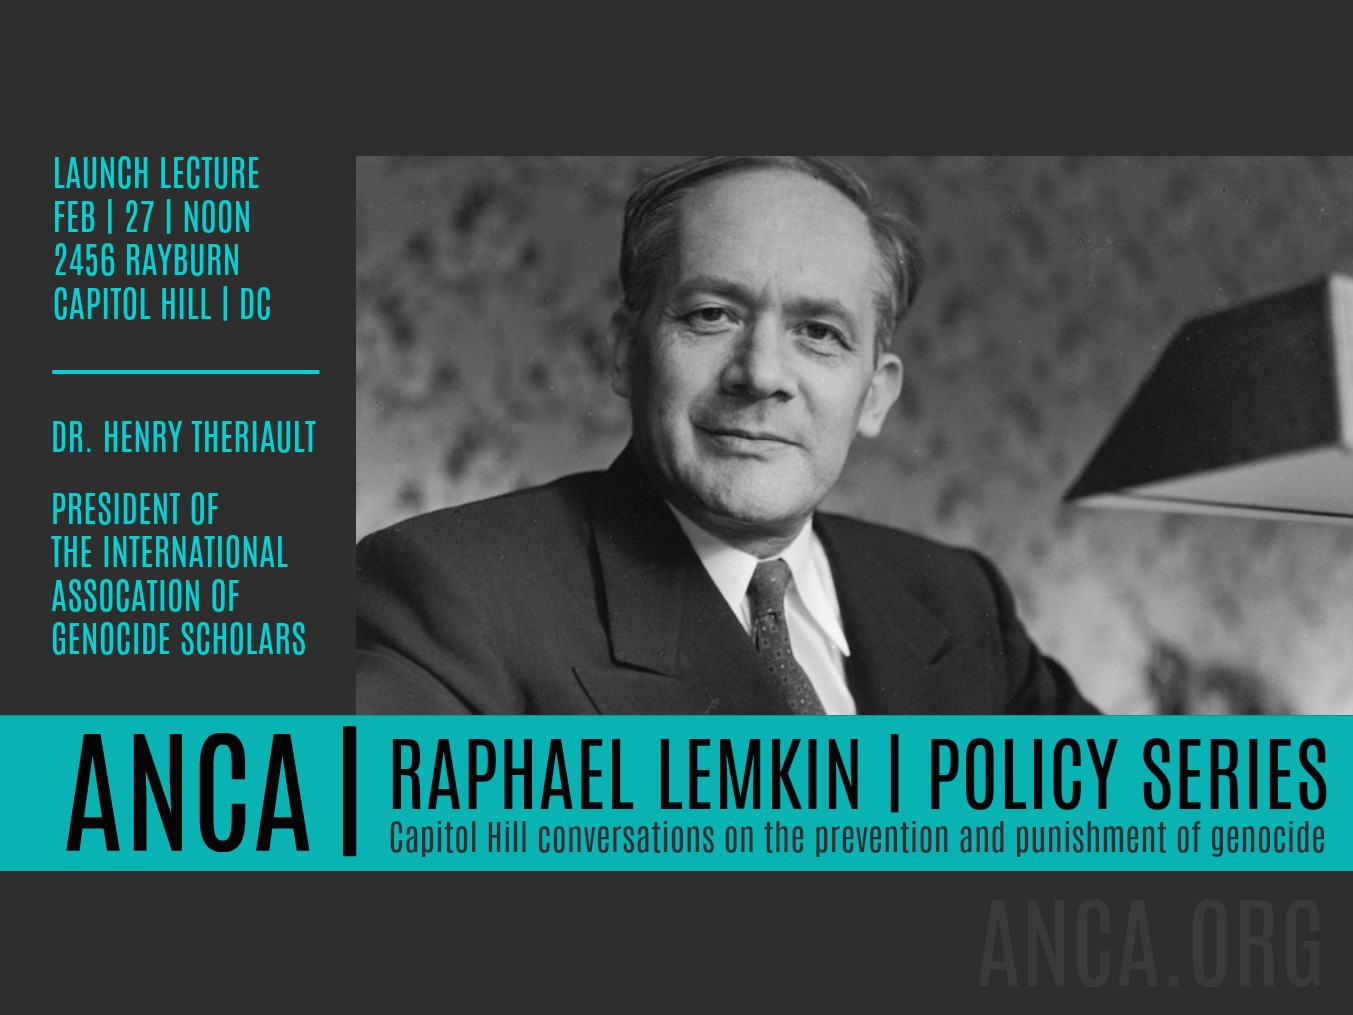 ANCA Launches Raphael Lemkin Policy Series on Genocide